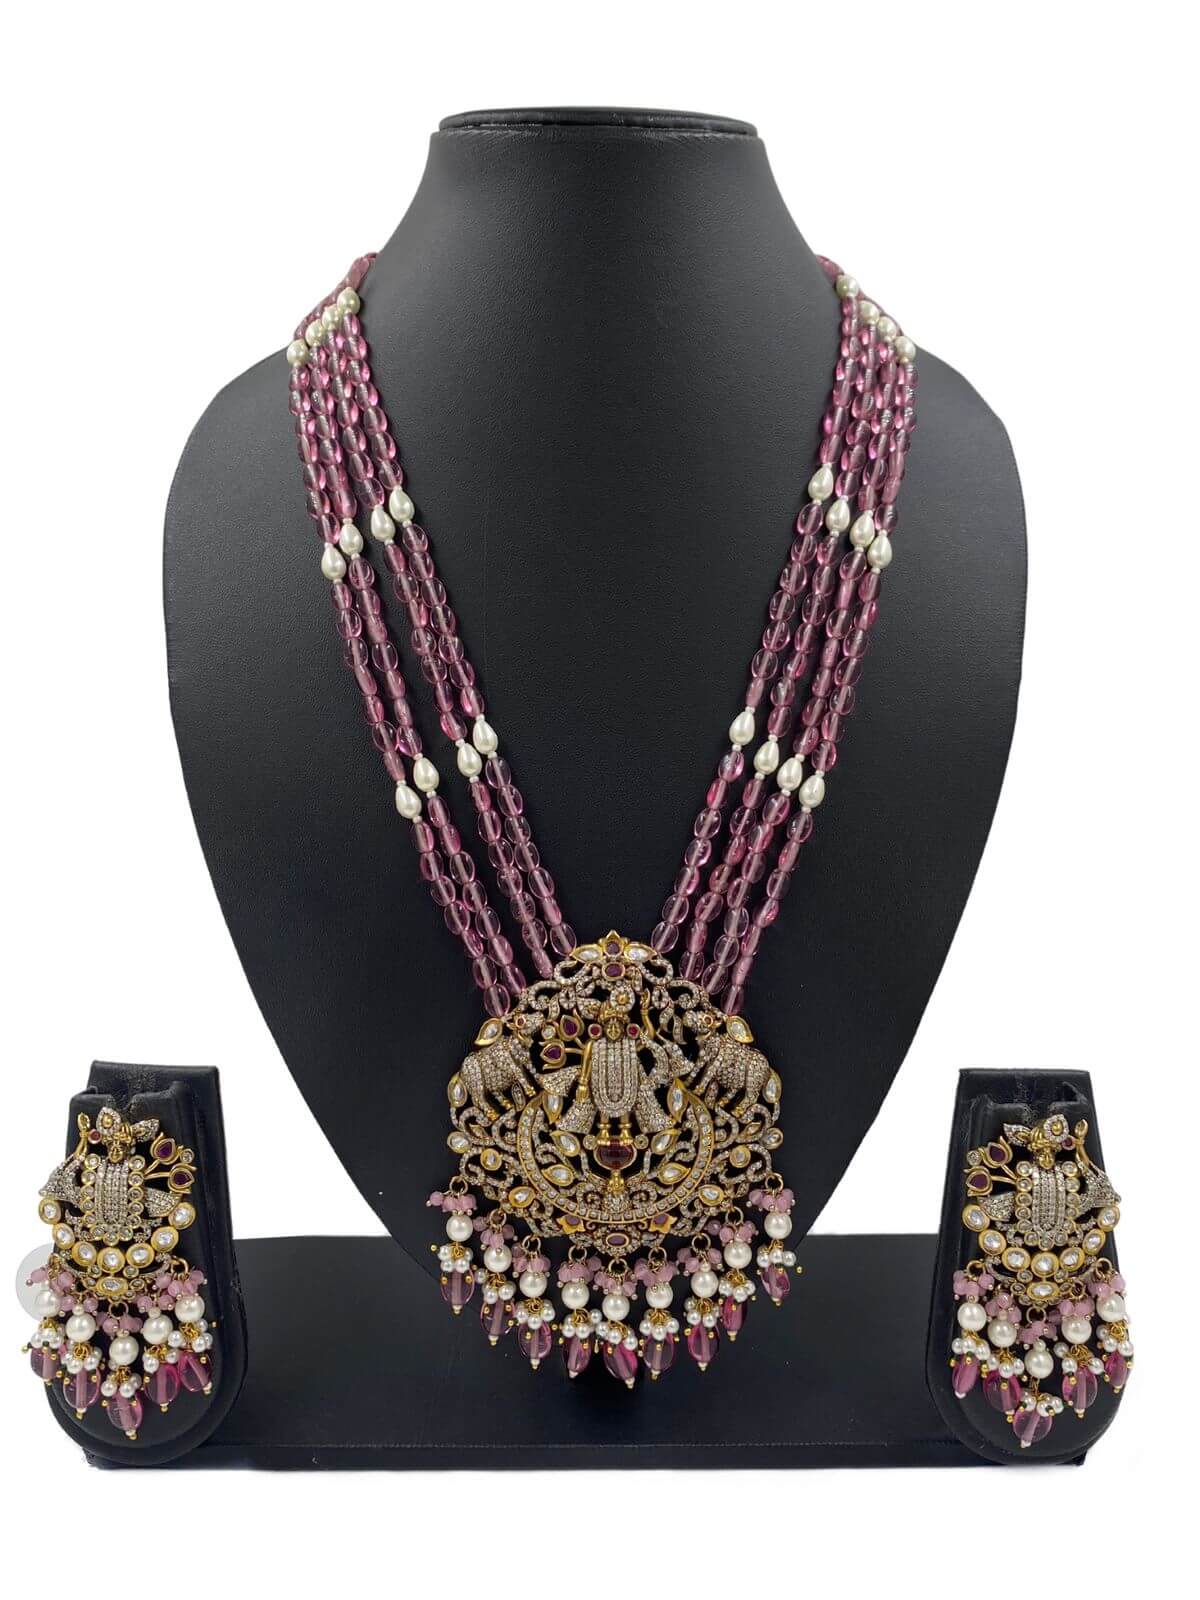 Lord Shrinathji Antique Victorian Temple Jewellery Necklace Set For Weddings Temple Necklace Sets